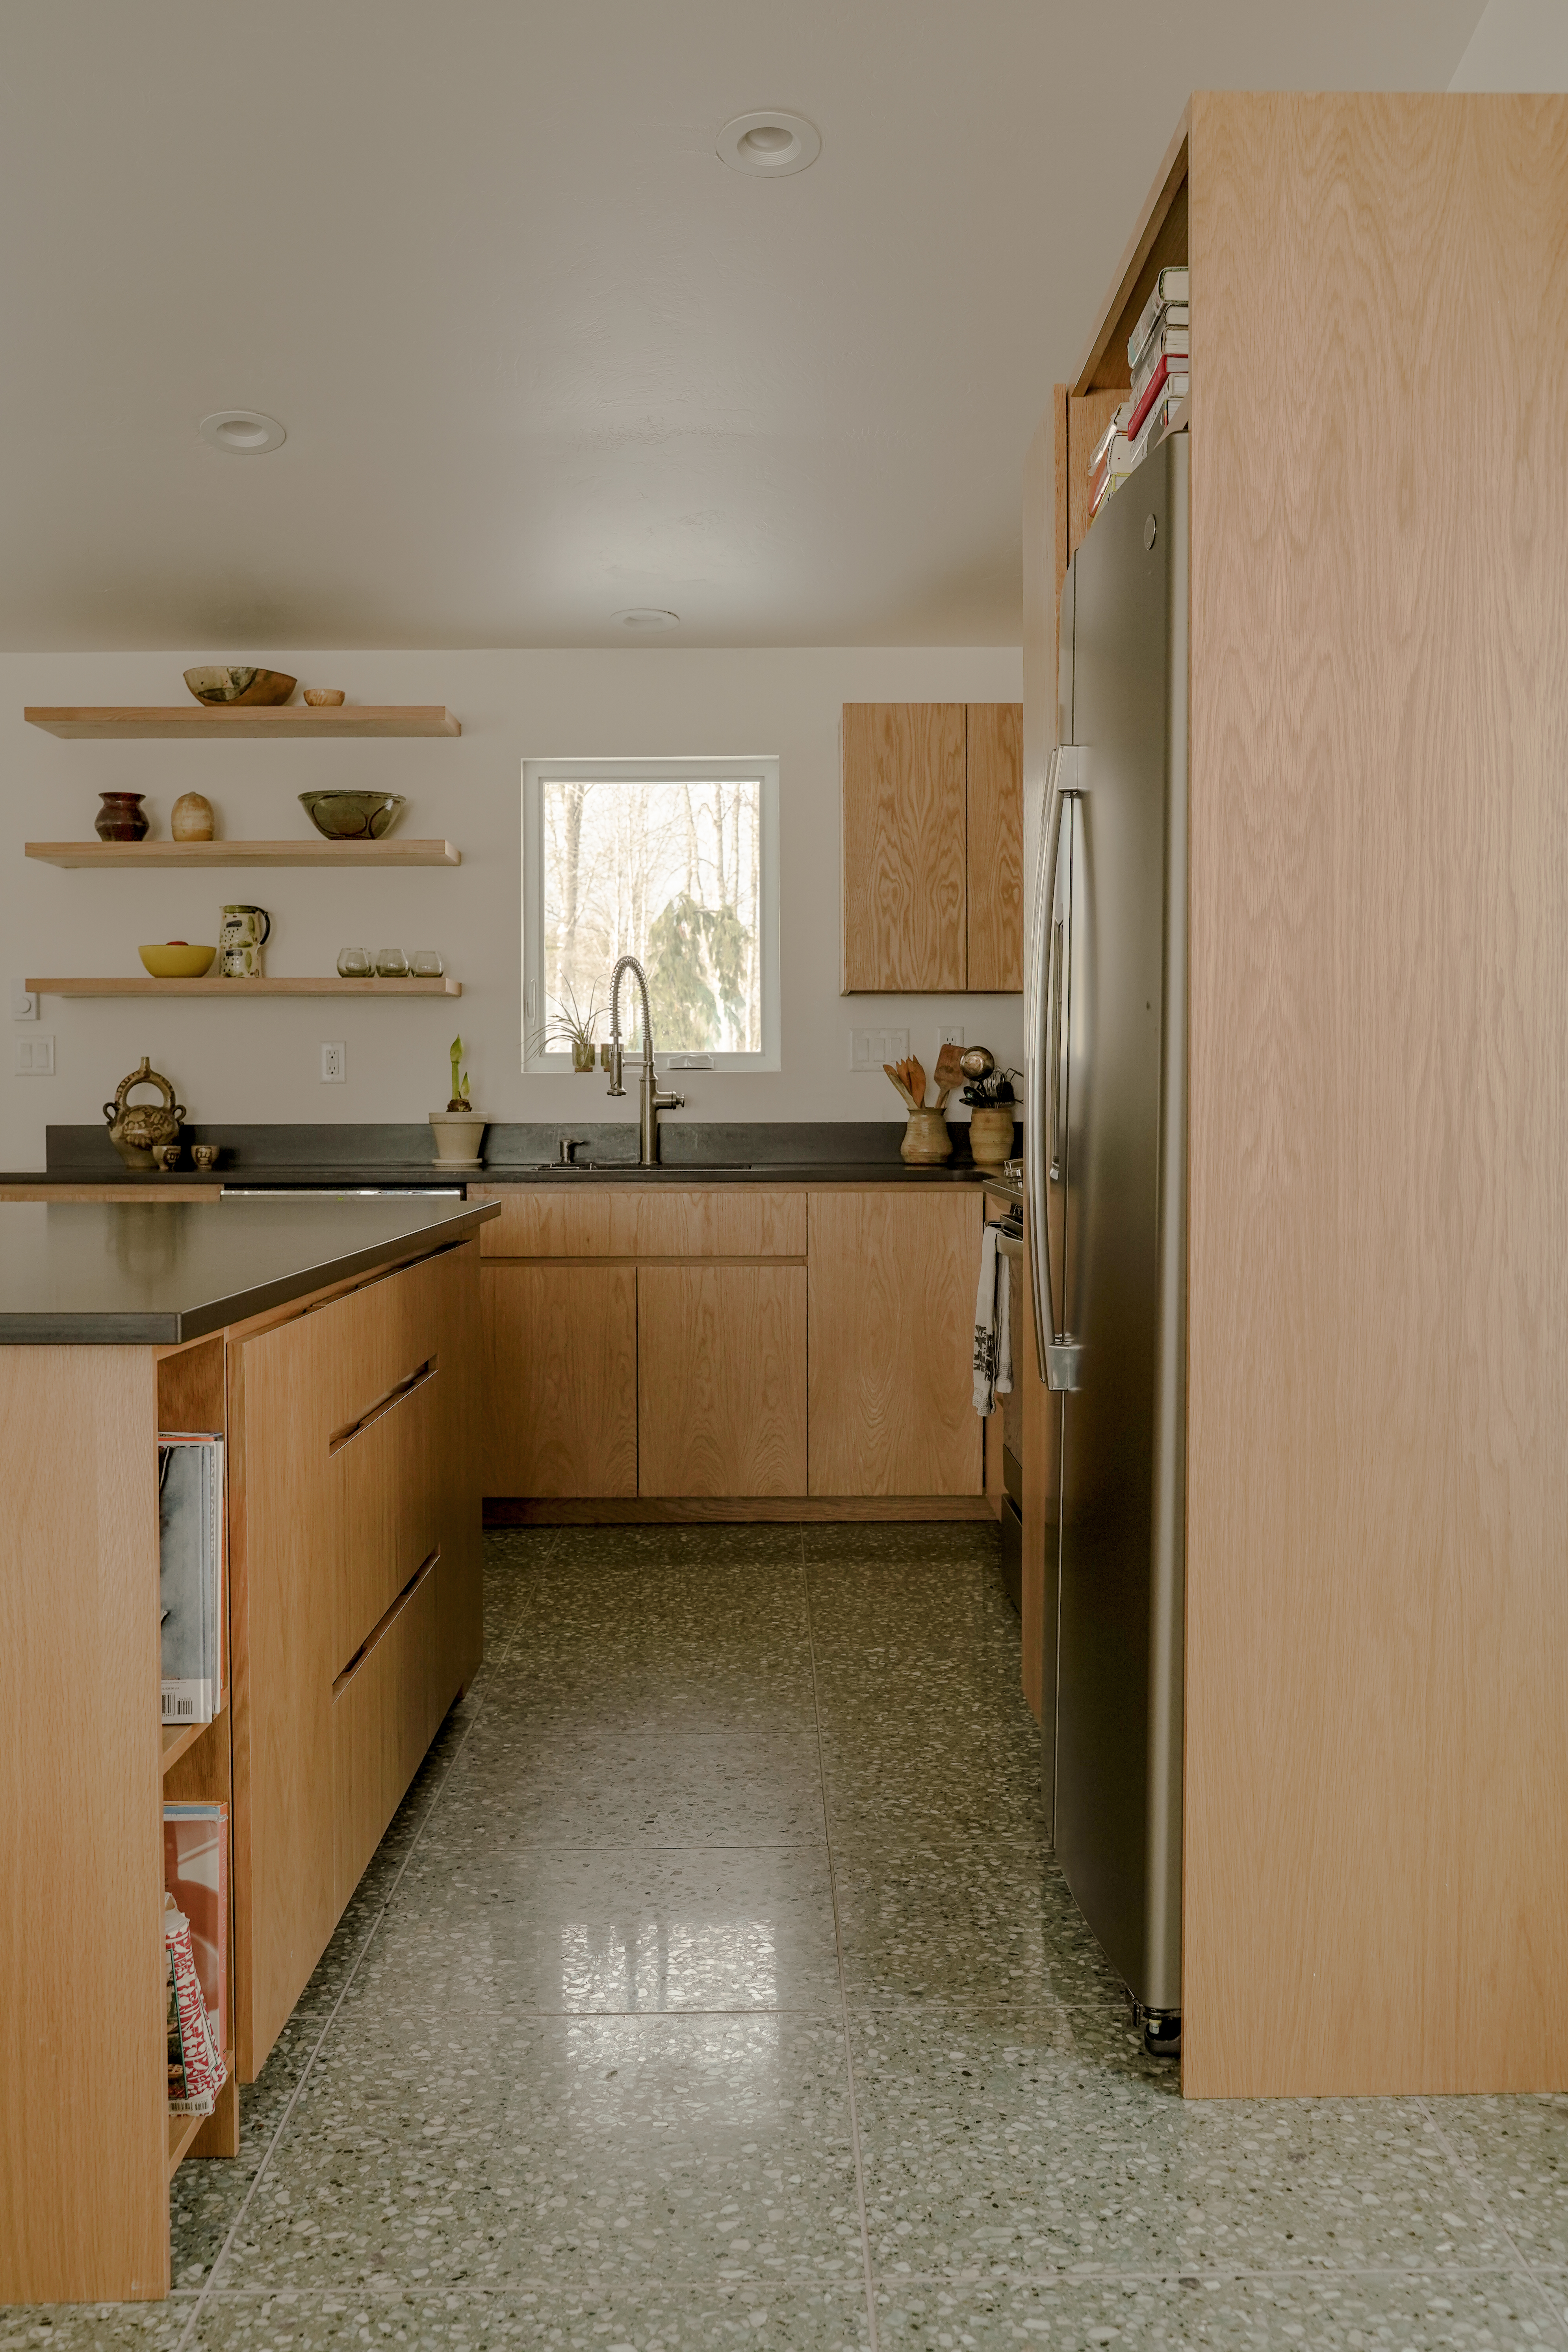 Kitchen renovation in Sturgeon Bay, Wisconsin, designed by Social Studies Projects. New terrazzo flooring and quarter-sawn white oak doors and drawers.